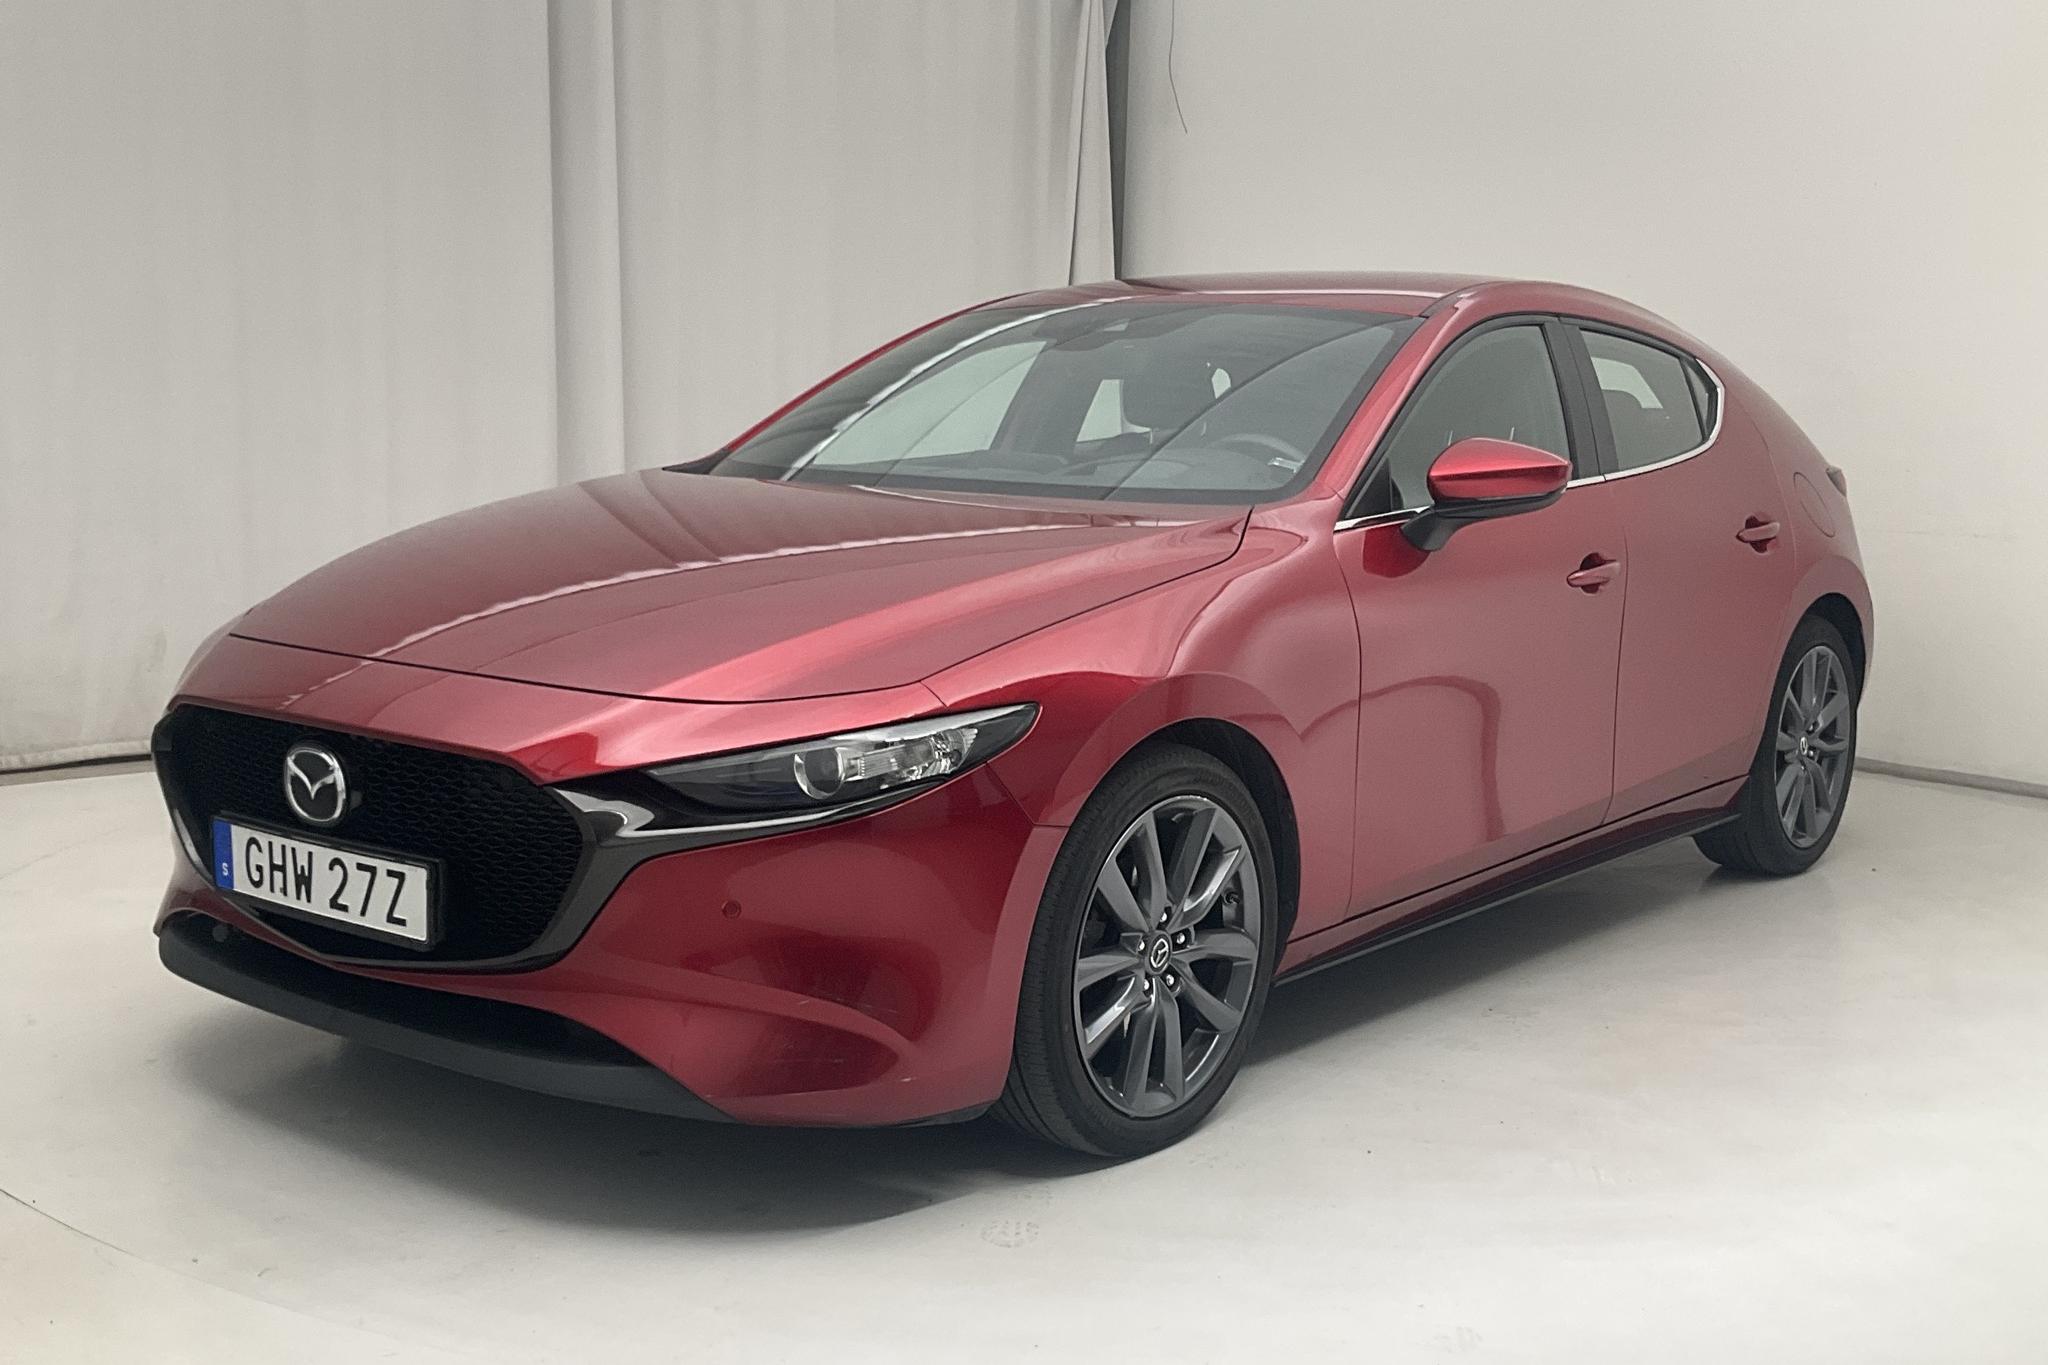 Mazda 3 2.0 5dr (122hk) - 56 180 km - Automatic - red - 2019